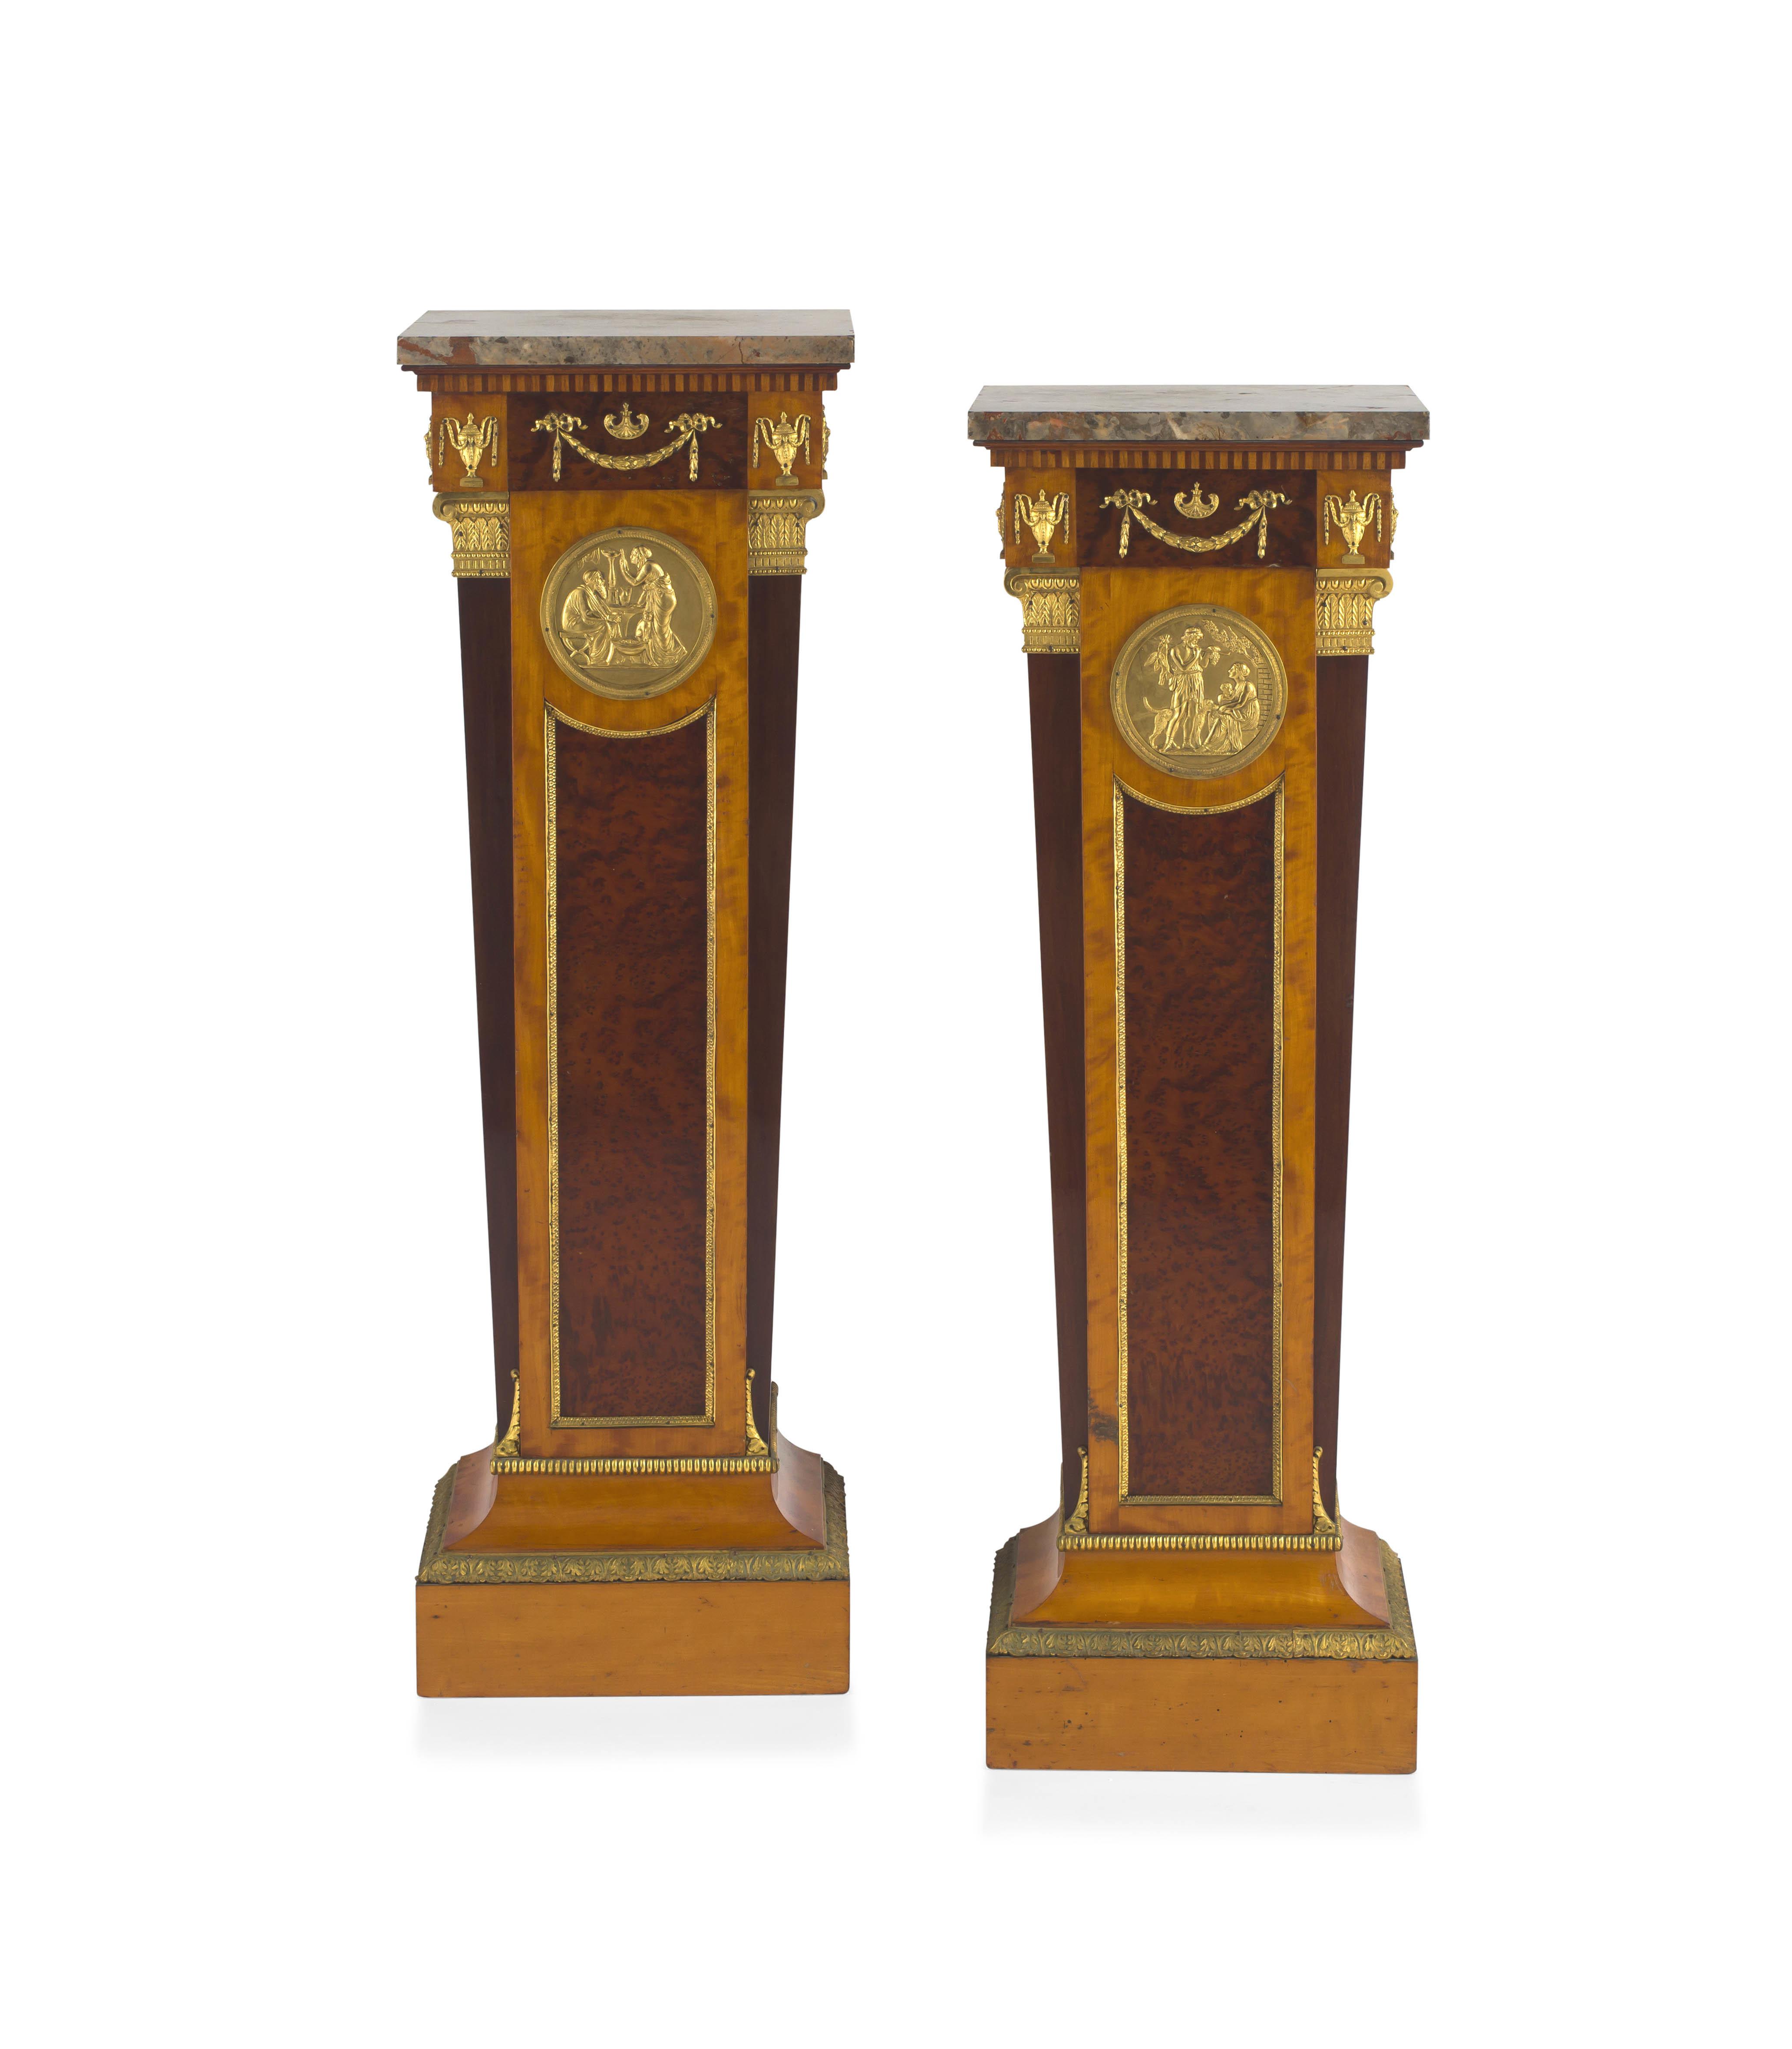 A pair of Empire style mahogany, birds-eye-maple and satinwood-veneered gilt-brass mounted pedestals, late 19th/early 20th century